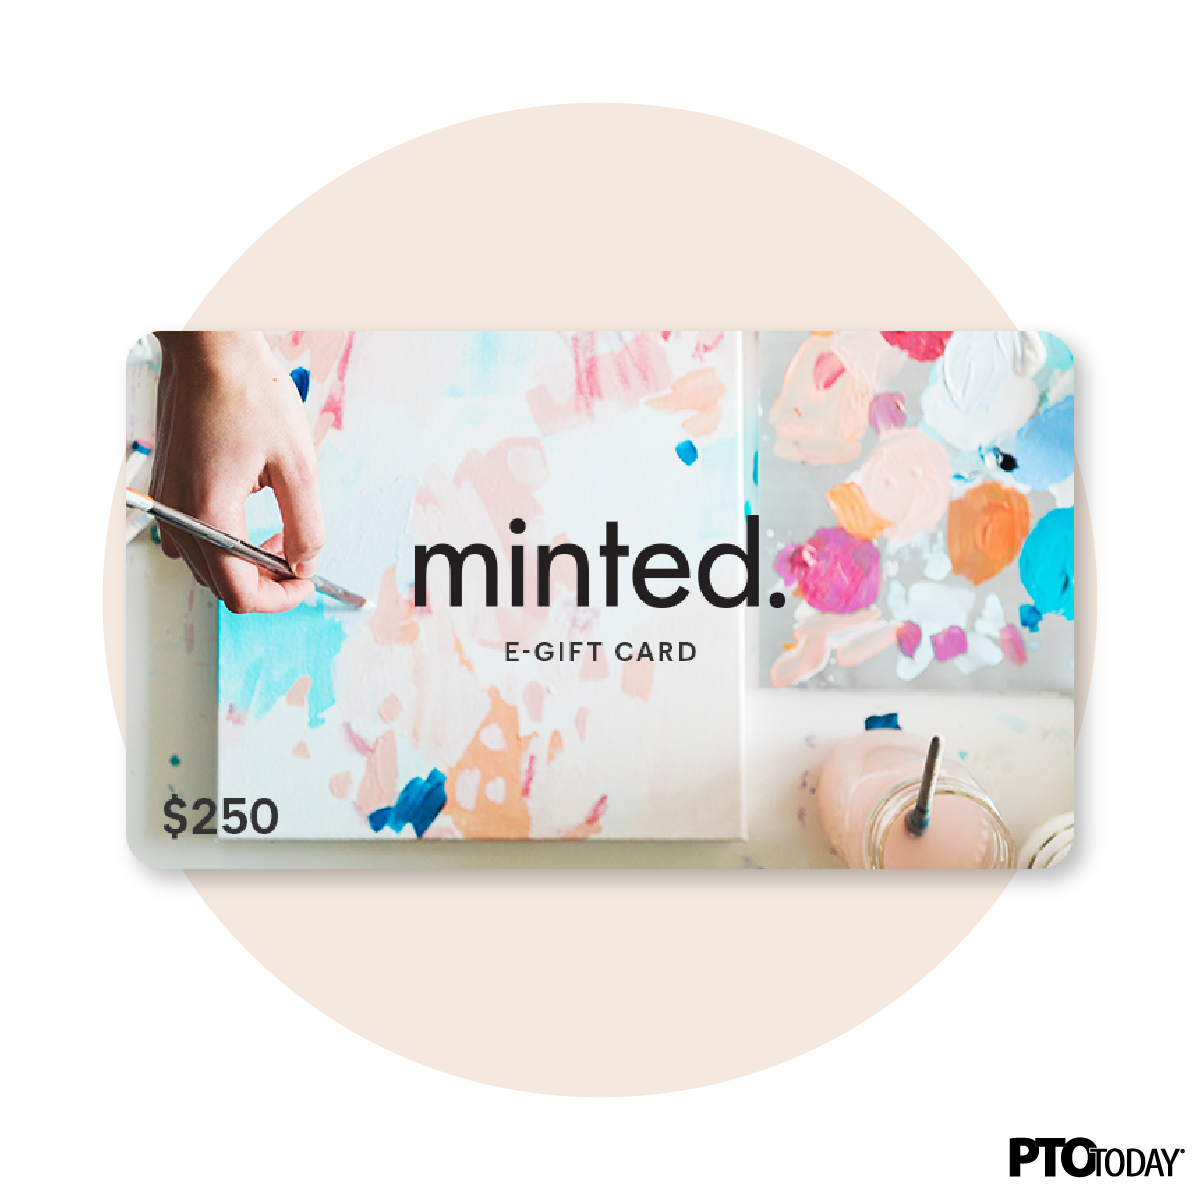 Nominate your group to win a $250 Minted gift card